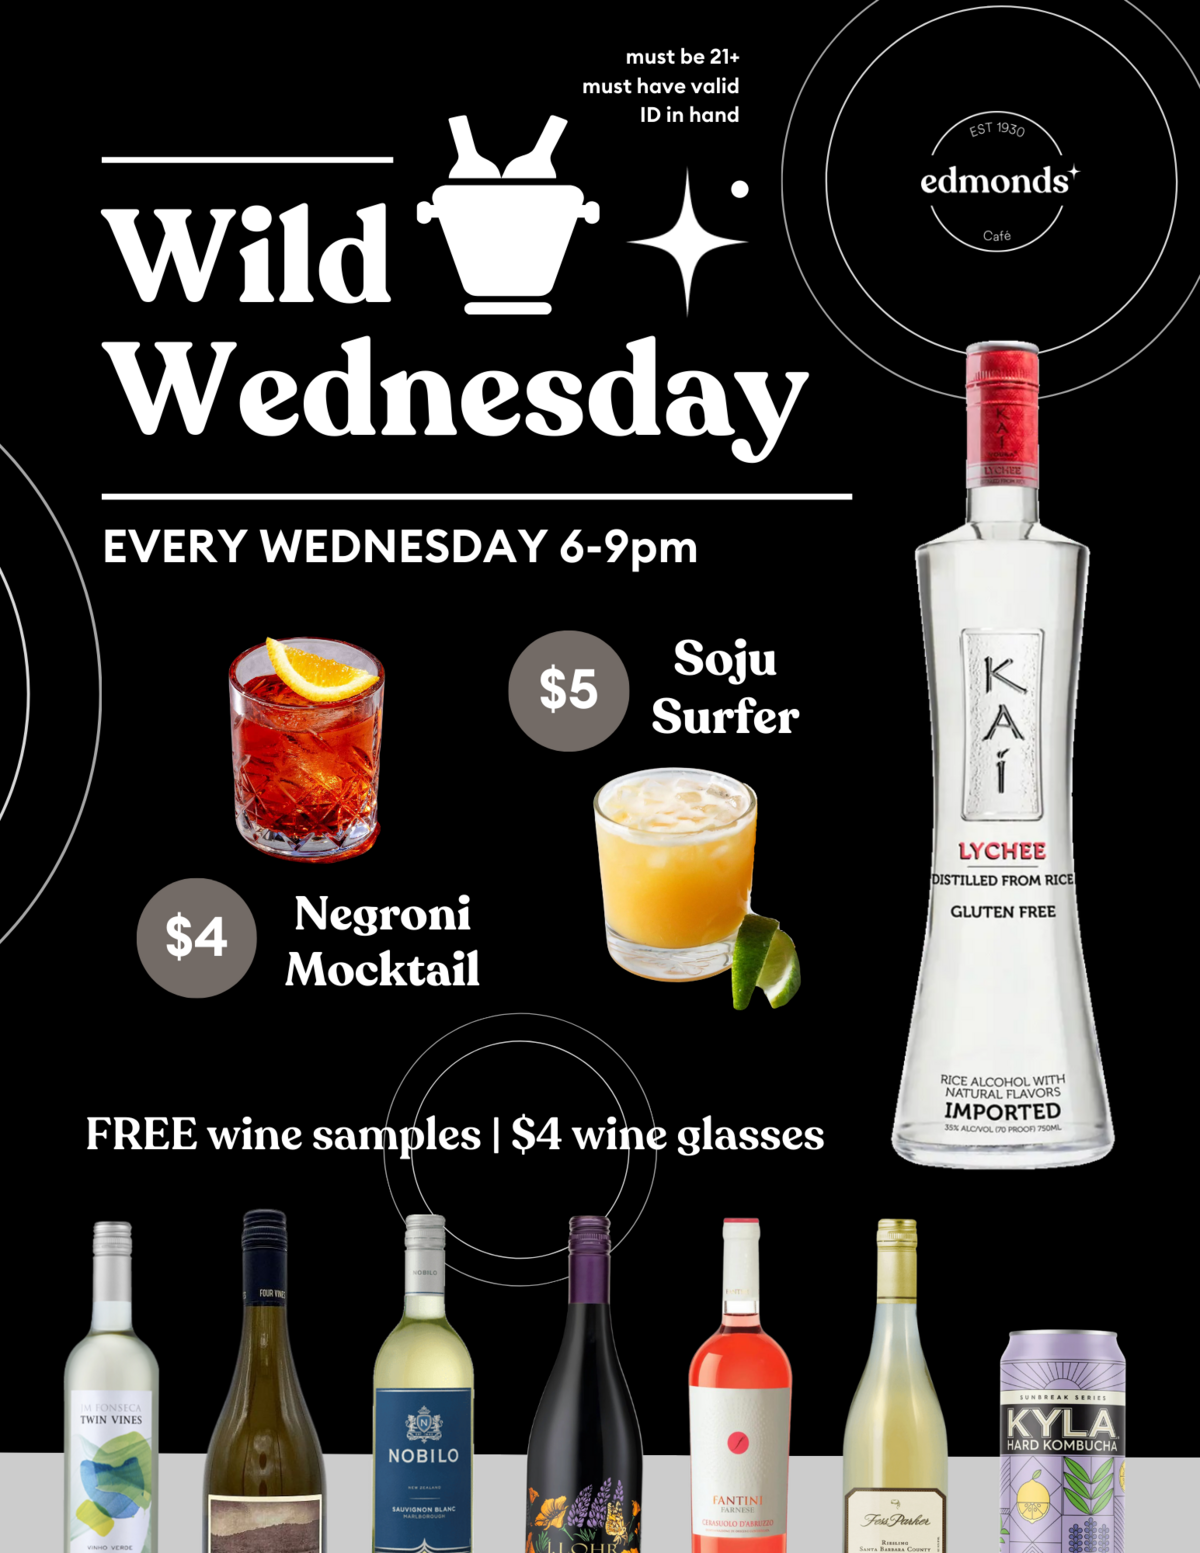 Wine Wednesdays Every Wed 5-9pm Free Samples - Discount Wines